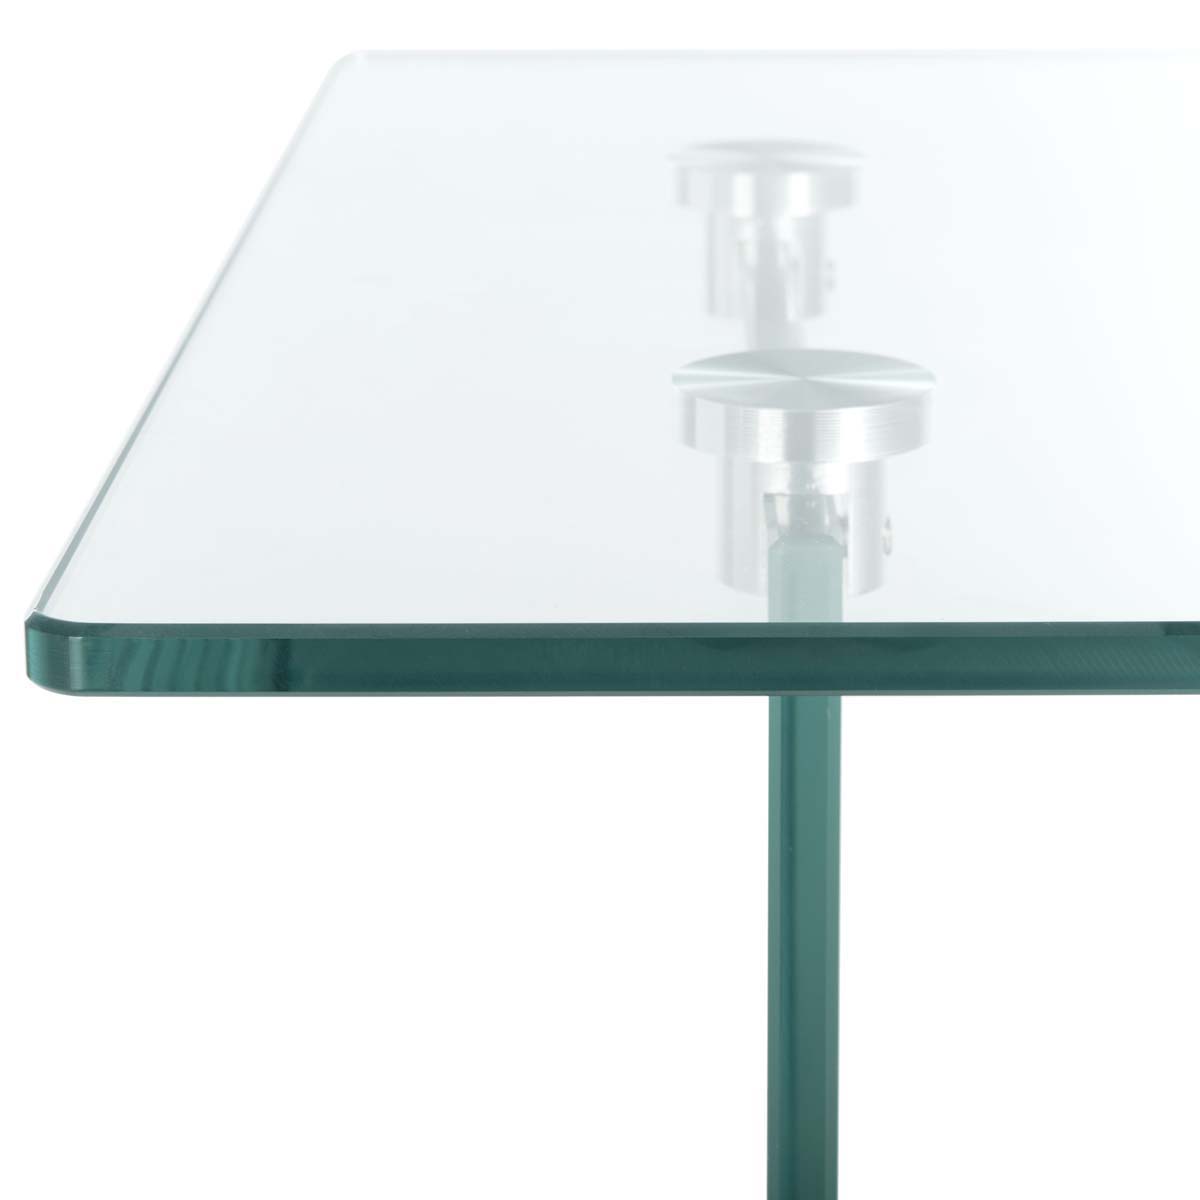 Safavieh Kayley Accent Table , ACC7001 - Glass/Faux White Marble Shelf